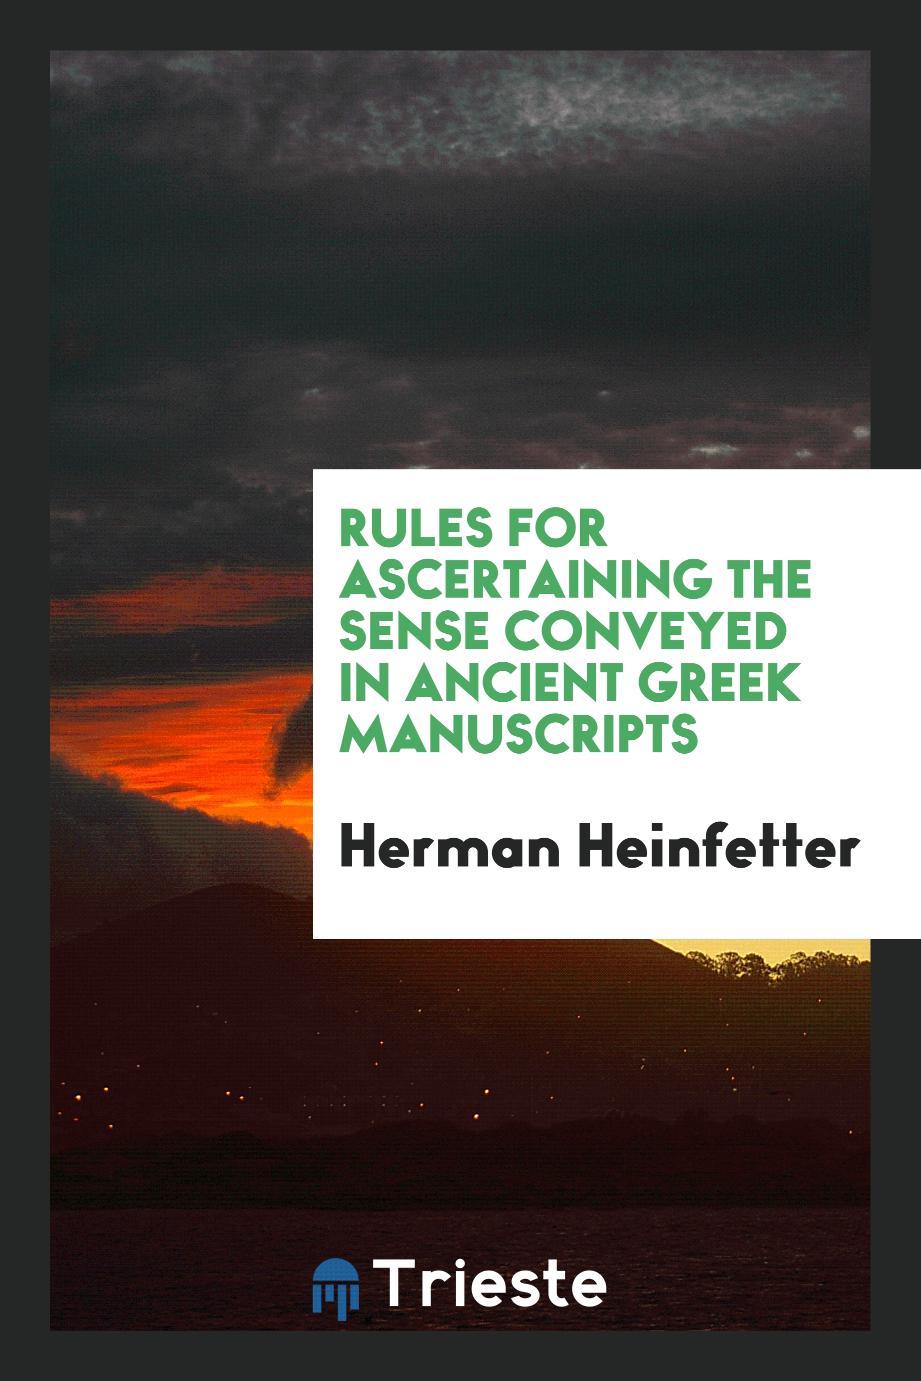 Rules for ascertaining the sense conveyed in ancient Greek manuscripts